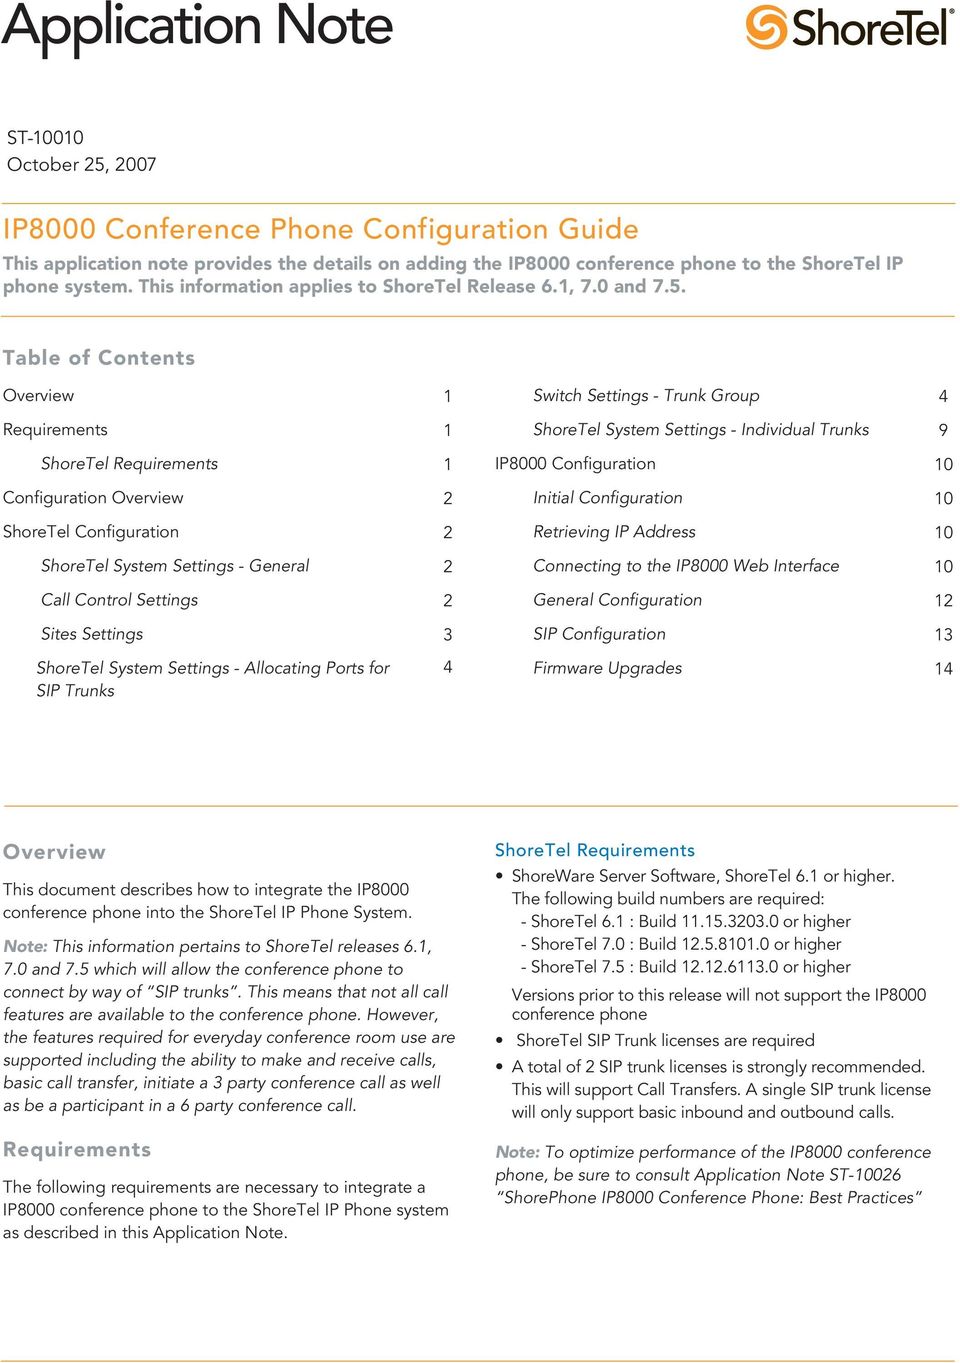 Table of Contents Overview 1 Switch Settings - Trunk Group 4 Requirements 1 ShoreTel System Settings - Individual Trunks 9 ShoreTel Requirements 1 IP8000 Configuration 10 Configuration Overview 2